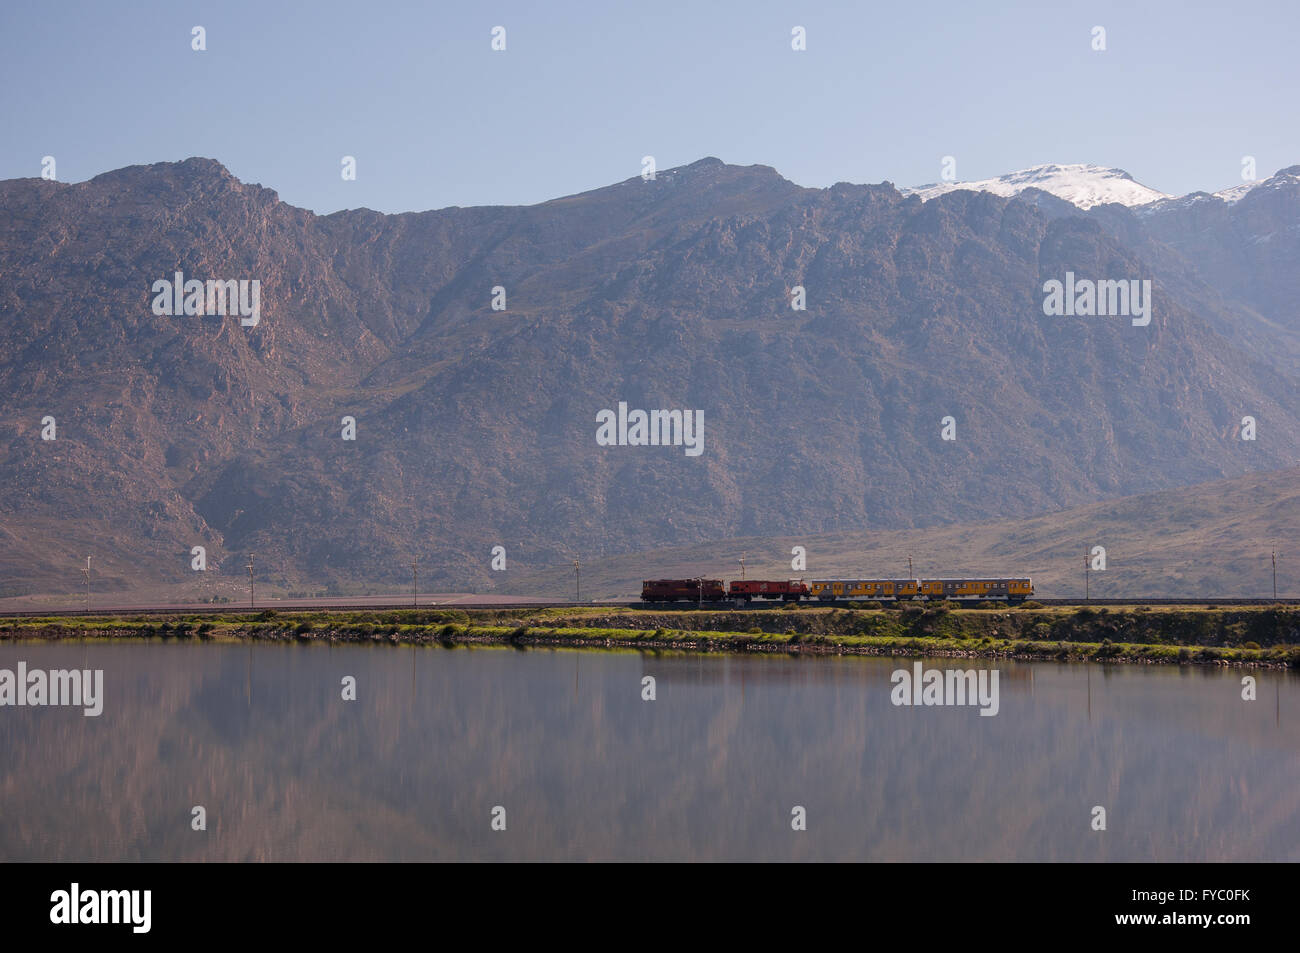 Train traffic southbound in the vicinity of Worcester town, with the mighty Hex River Mountains looming in the background. Stock Photo